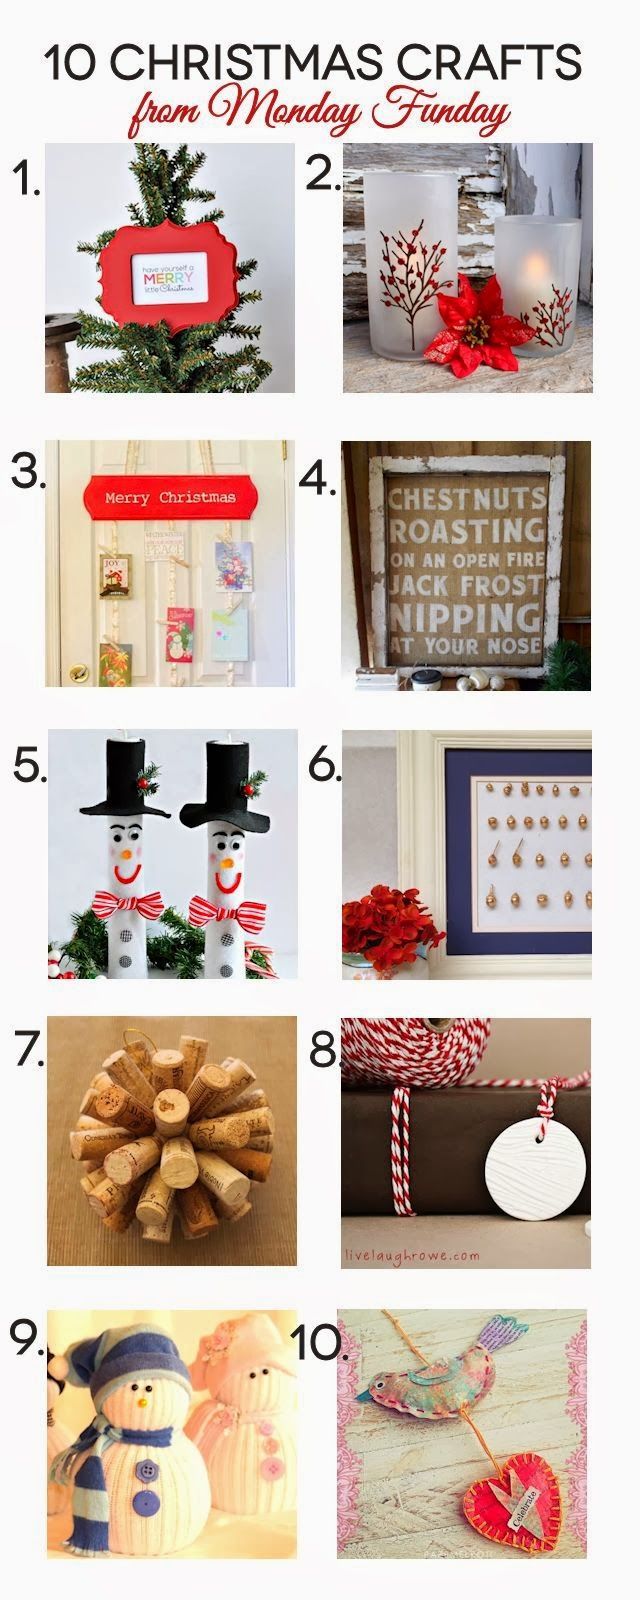 10 Inexpensive Christmas crafts